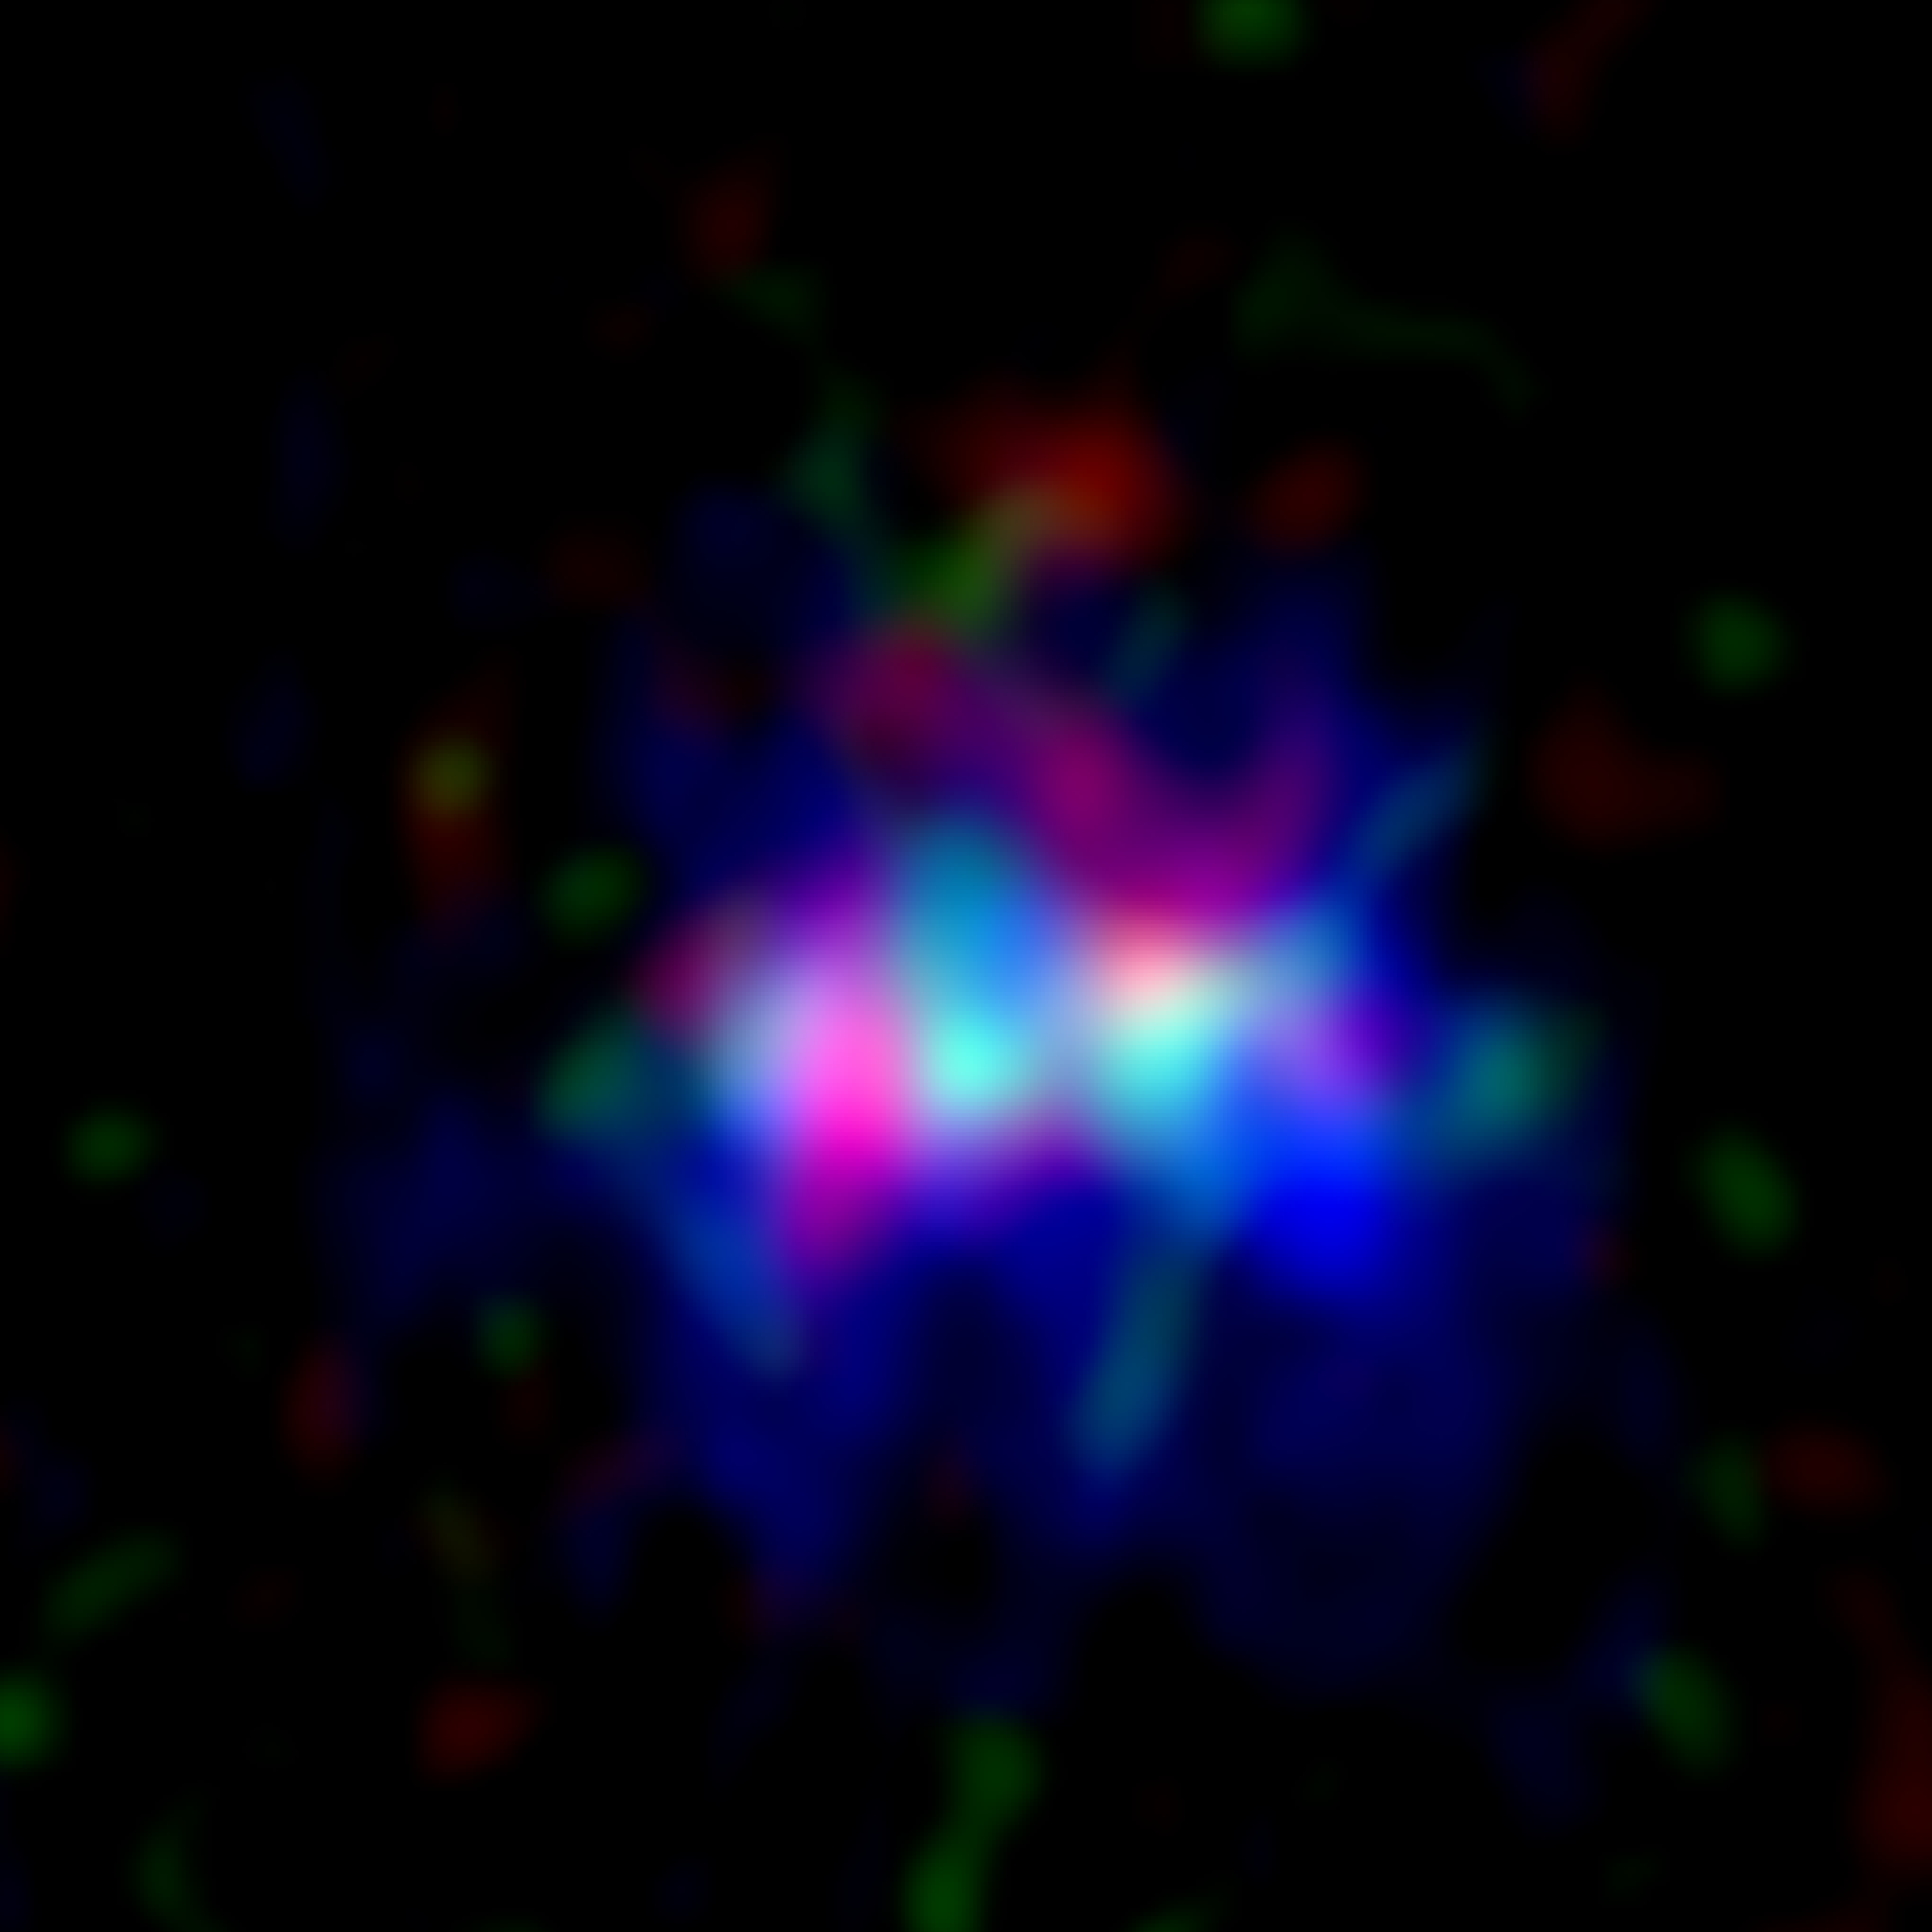 The ALMA image of the galaxy MACS0416_Y1 located 13.2 billion light-years away, harboring the farthest ever dark nebula. The image spans approximately 15,000 light-years on each side. Radio images captured by ALMA depicting the dark nebula (emitting radio waves from dust, shown in red) and the emission nebula (emitting radio waves from oxygen, green), along with the image of stars captured by the Hubble Space Telescope (blue). Credit: ALMA (ESO/NAOJ/NRAO), Y. Tamura et al., NASA/ESA Hubble Space Telescope. Credit: ALMA (ESO/NAOJ/NRAO), Y. Tamura et al.